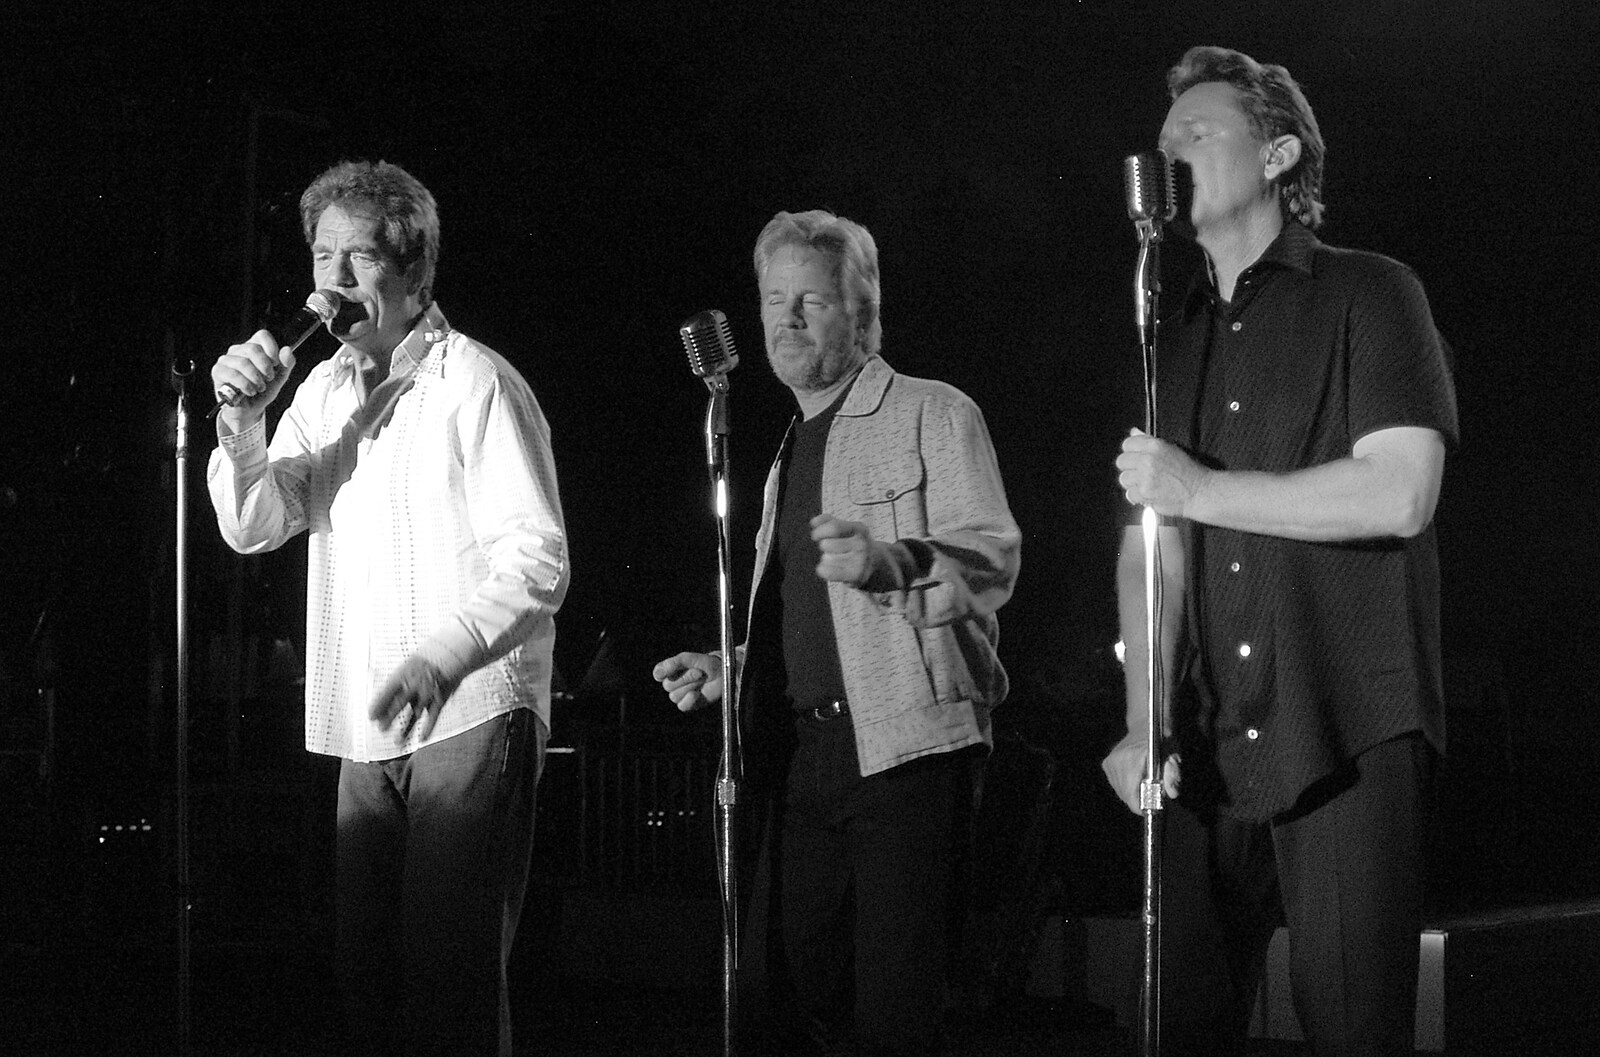 There's an acapella moment from BREW Fest and Huey Lewis and the News, Balboa Park, San Diego, California - 2nd June 2005